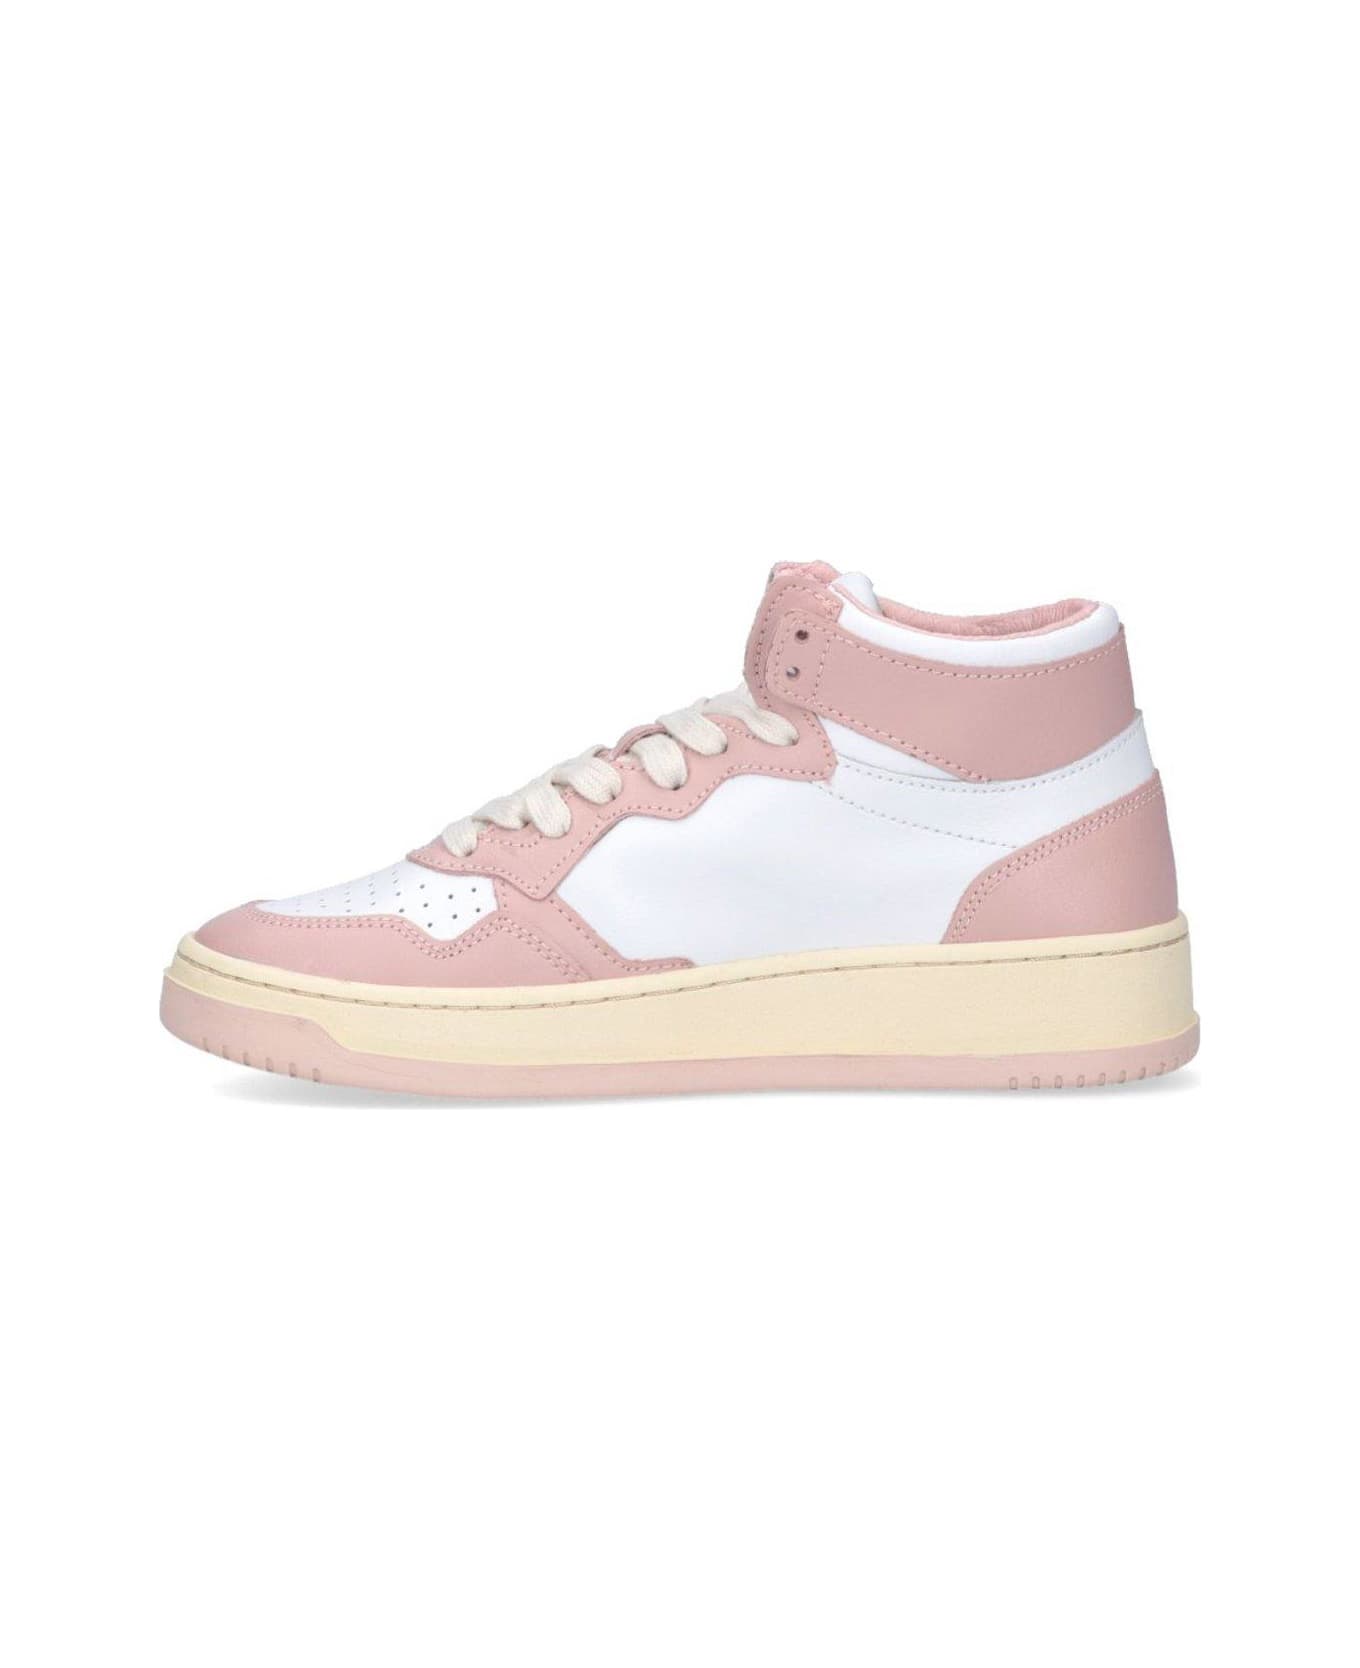 Autry Medalist Mid-top Sneakers - Bianco e Rosa スニーカー